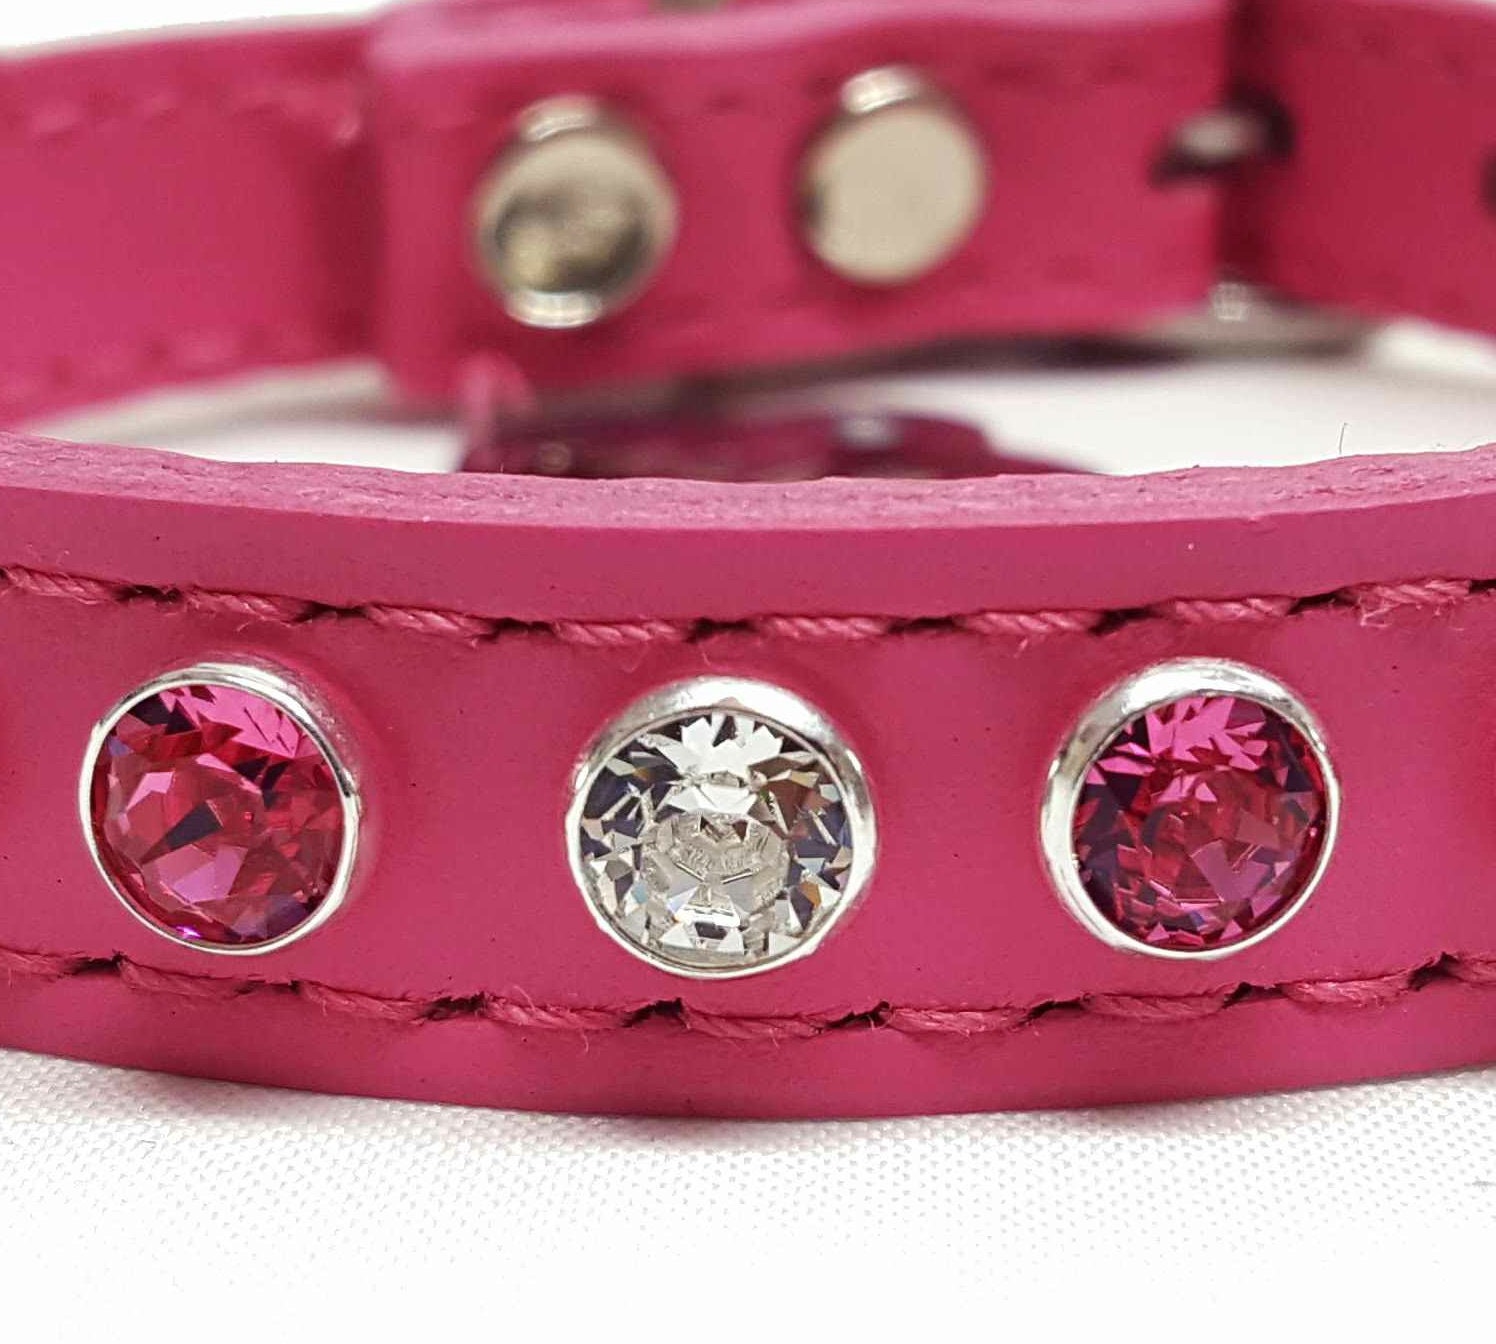 SHELLTON Gold Bling Diamond Giltter Leather Fashion Collar with Ring for  Tags for Small Dogs,Cat,Puppy and Kitty Walking Travel Party Gifts Tedd,  Poodle Dog,Bulldog and Yorkshire Terrier 